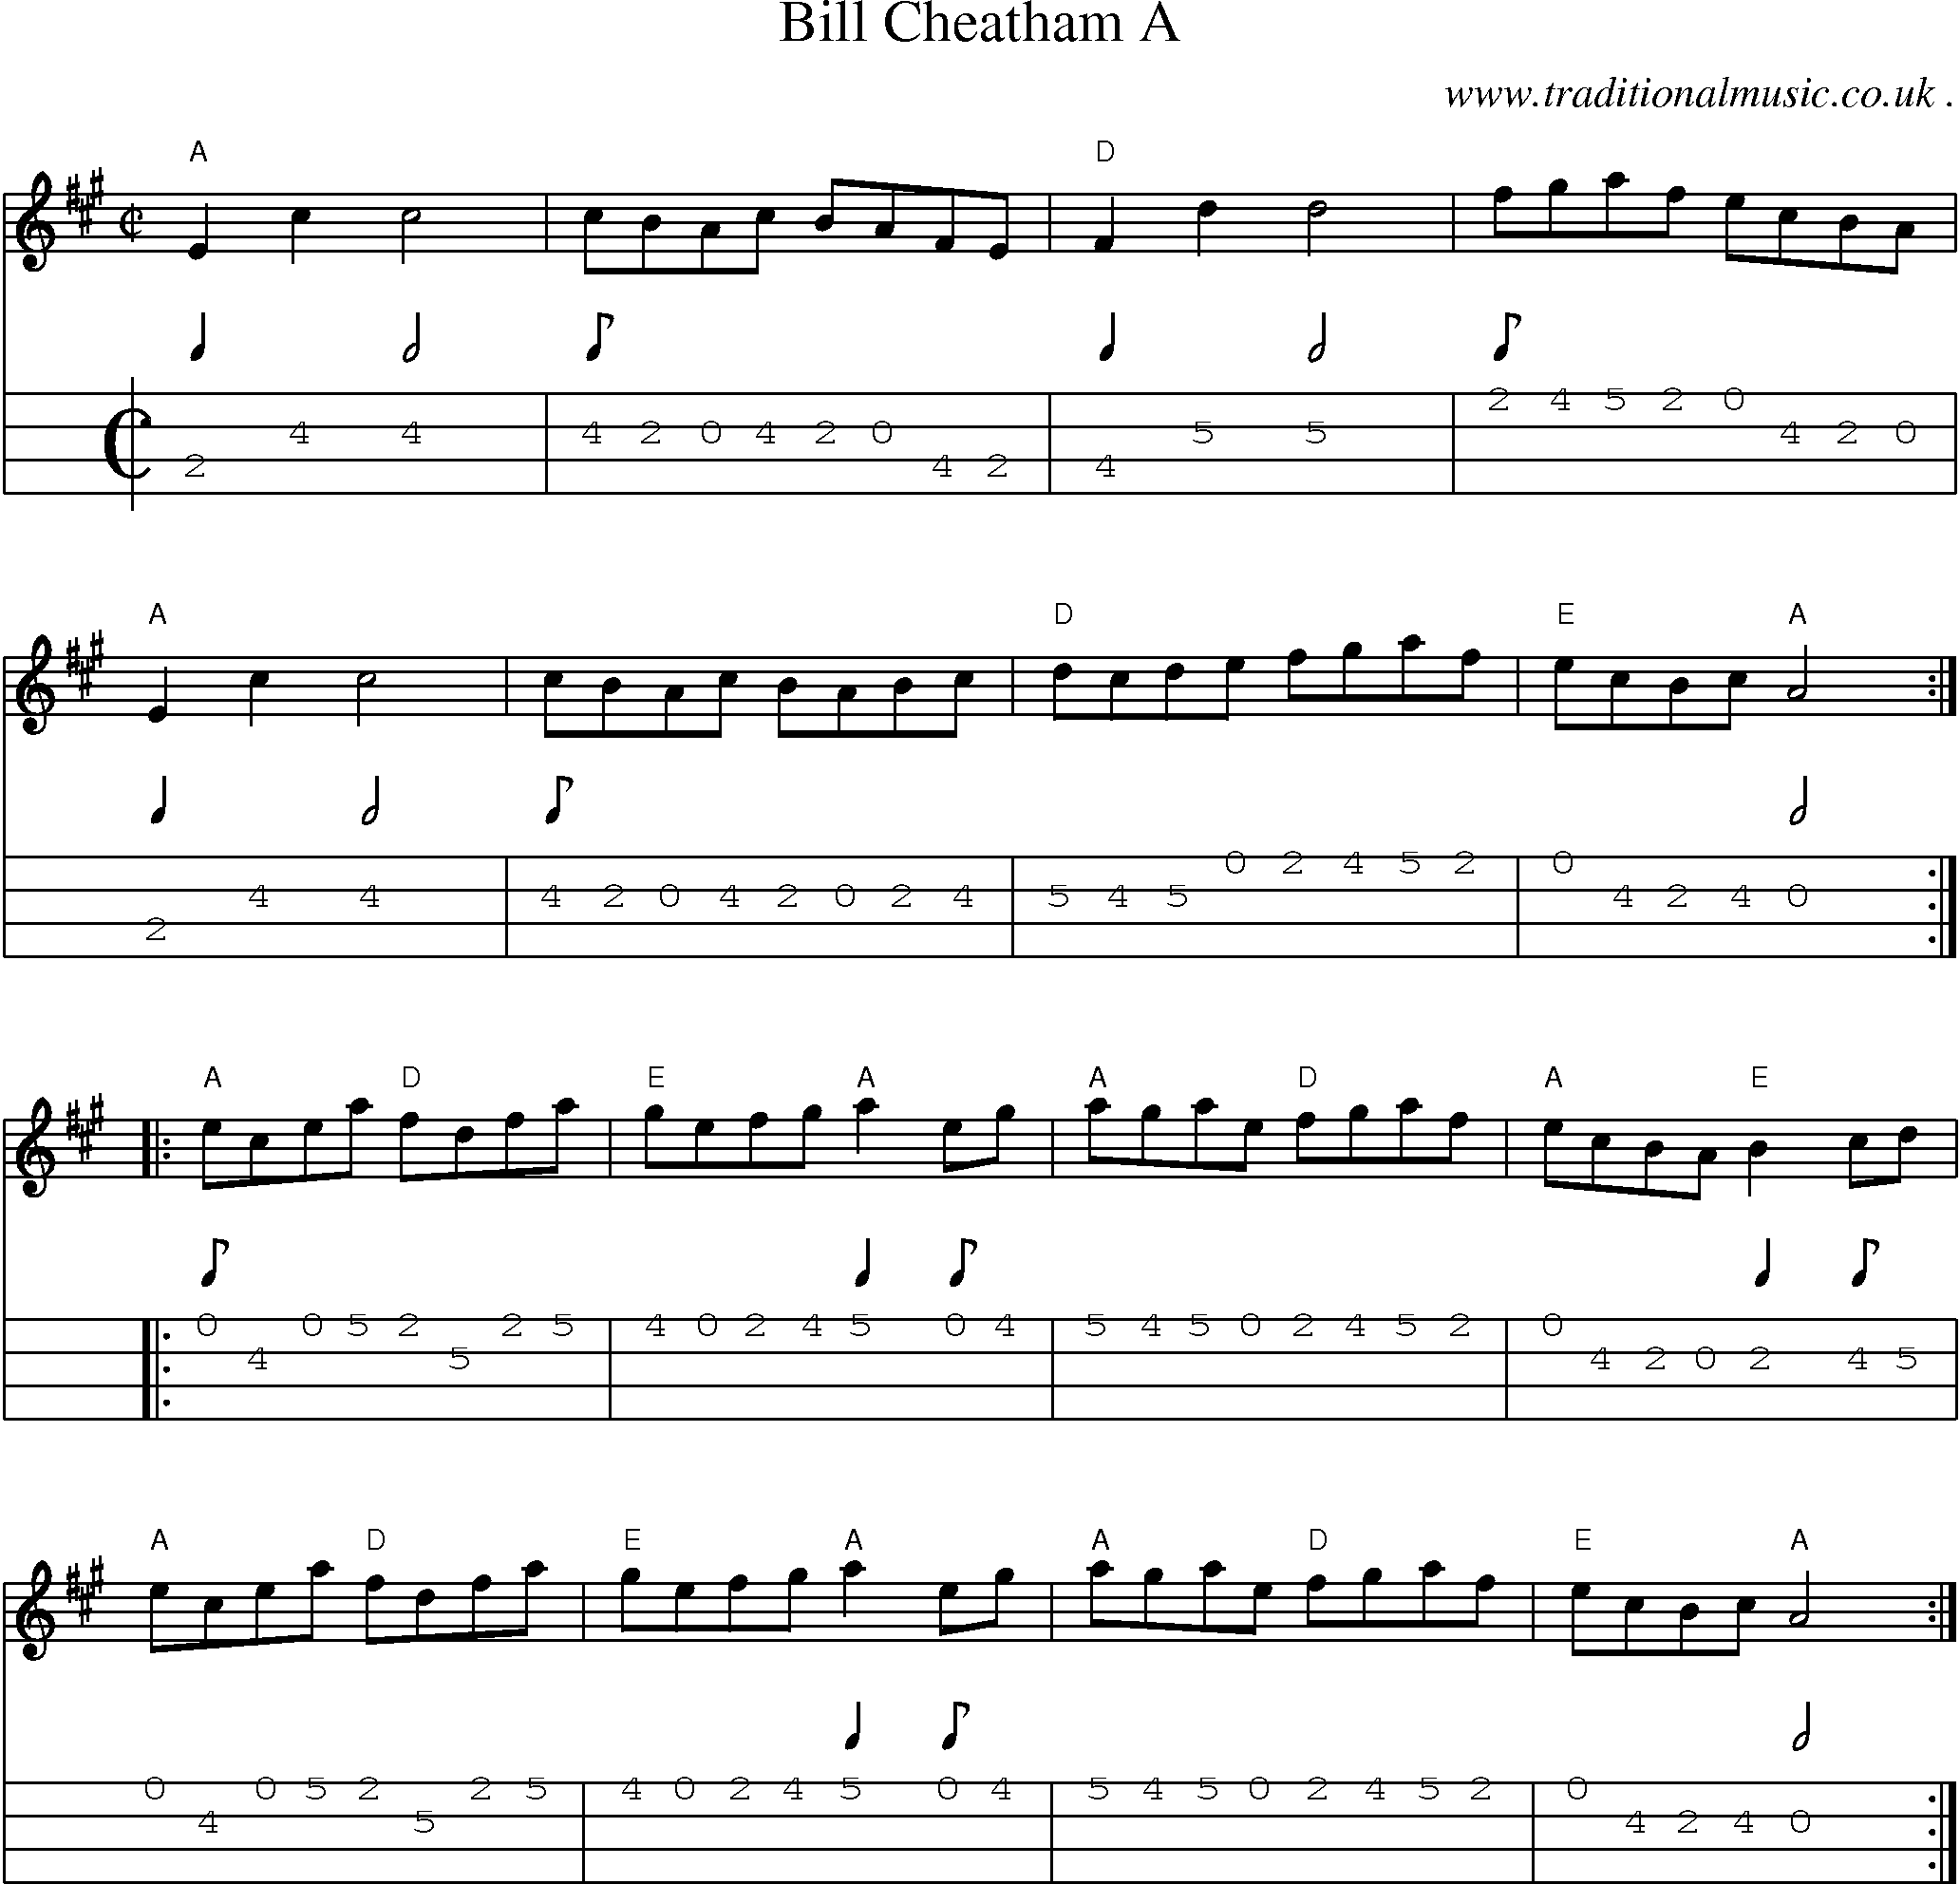 Music Score and Mandolin Tabs for Bill Cheatham A